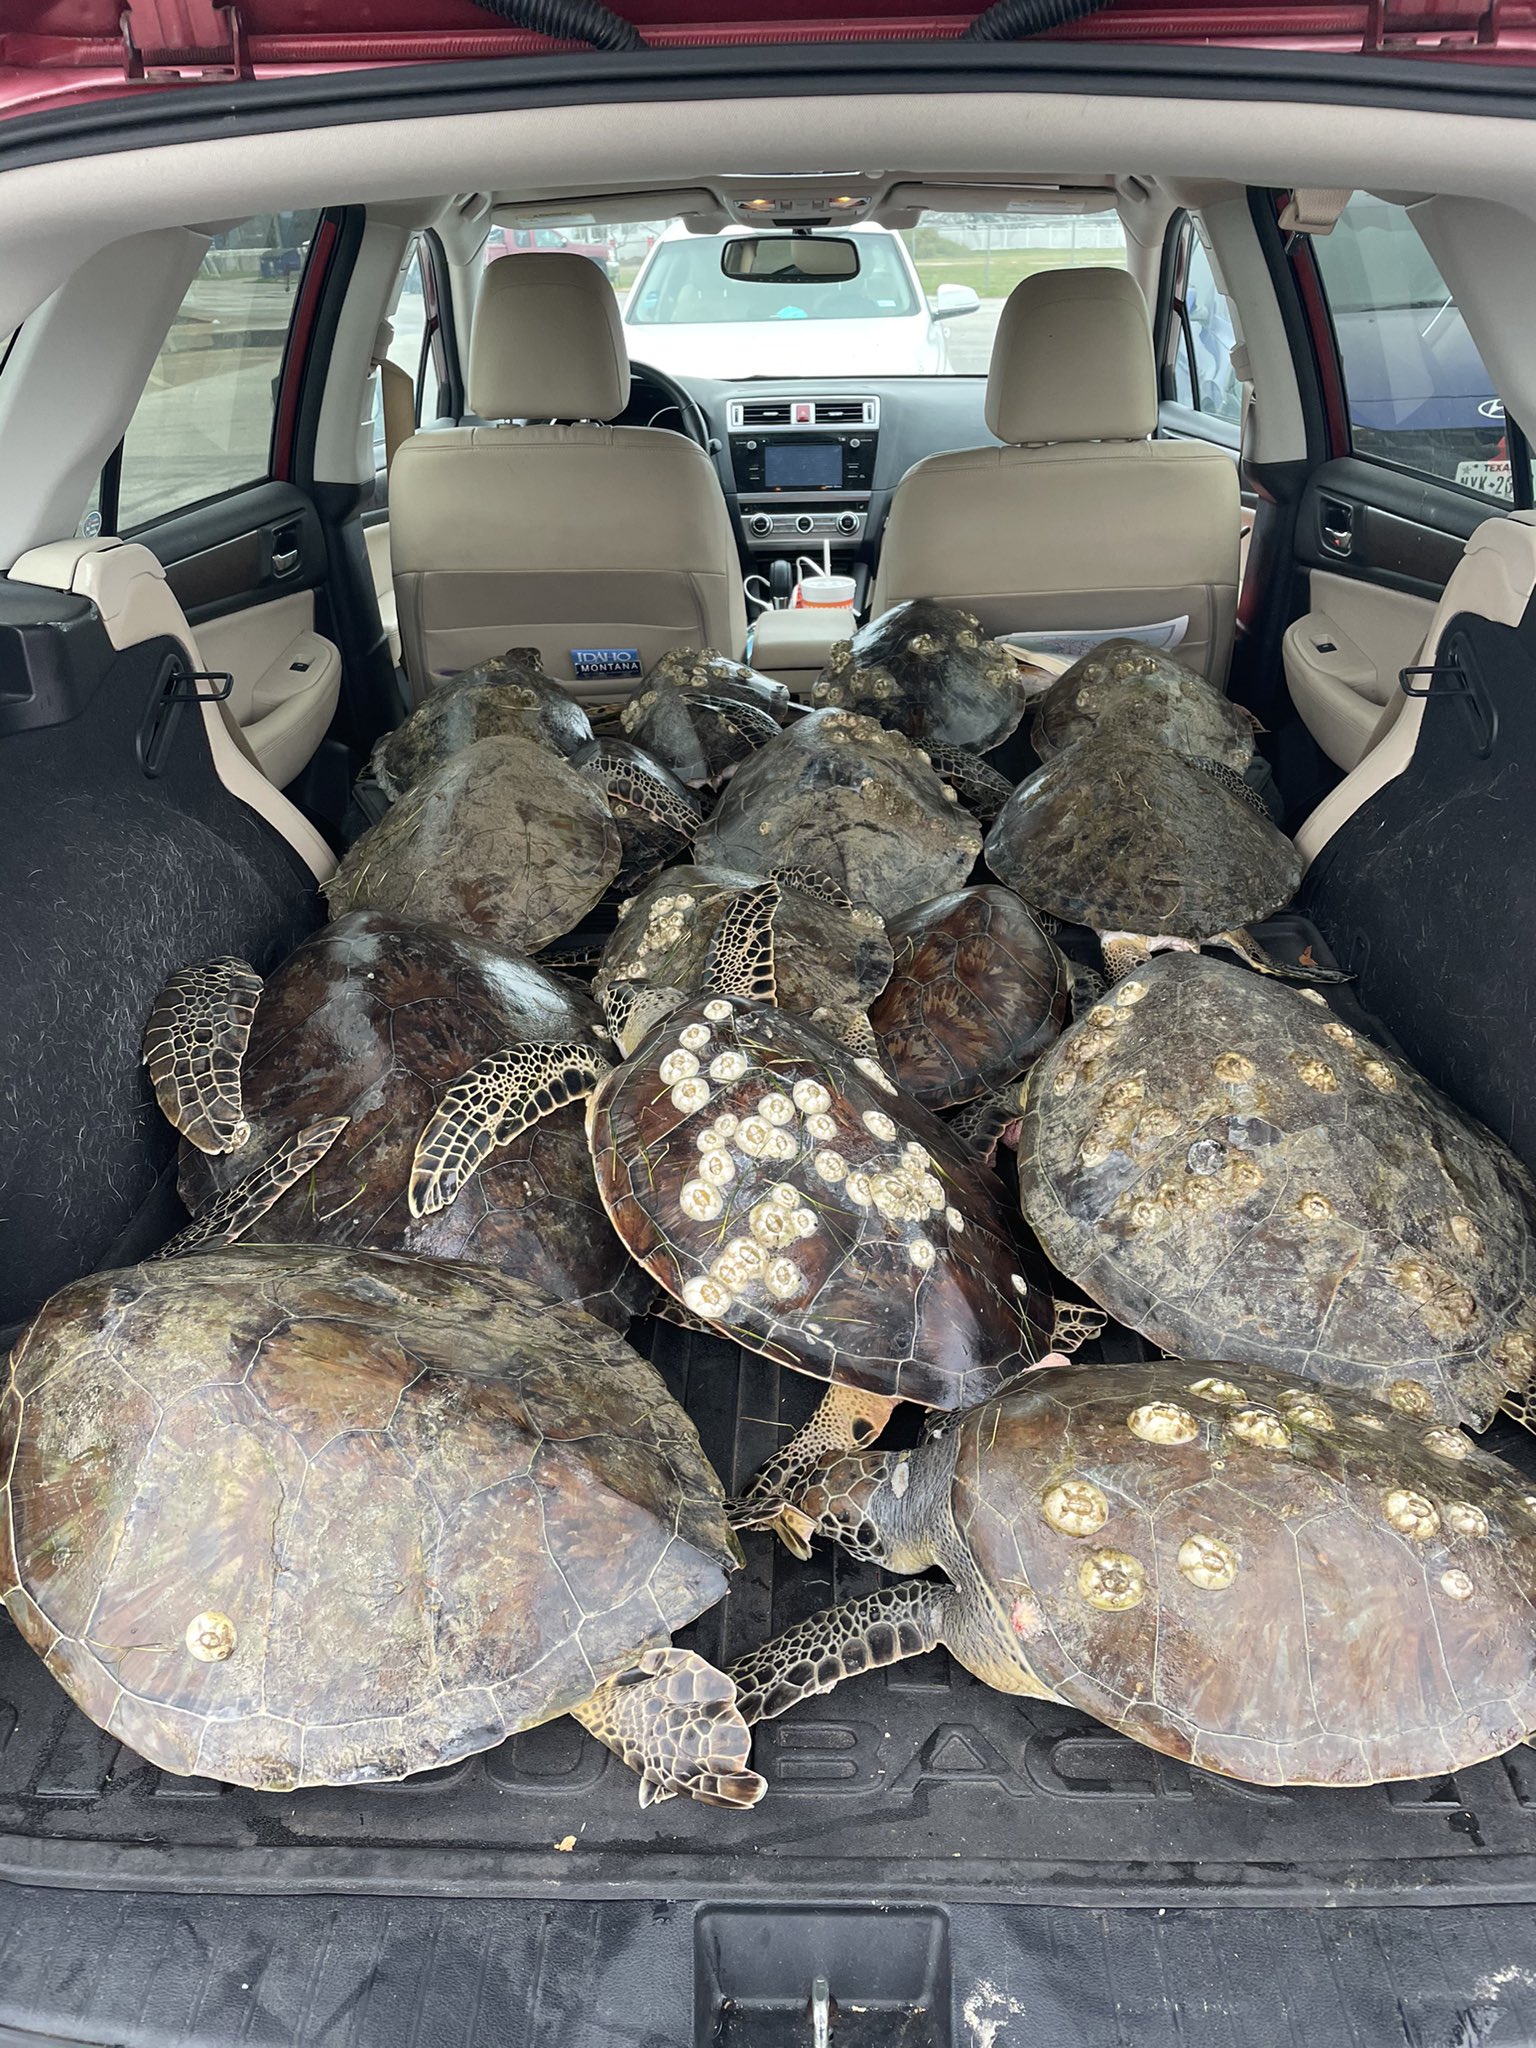 “My mom is retired, & she spends her winters volunteering at a sea turtle rescue center in south Texas. The cold snap is stunning the local turtles & they’re doing a lot of rescues. She sent me this photo today of the back of her Subaru. It’s *literally* turtles all the way down.”